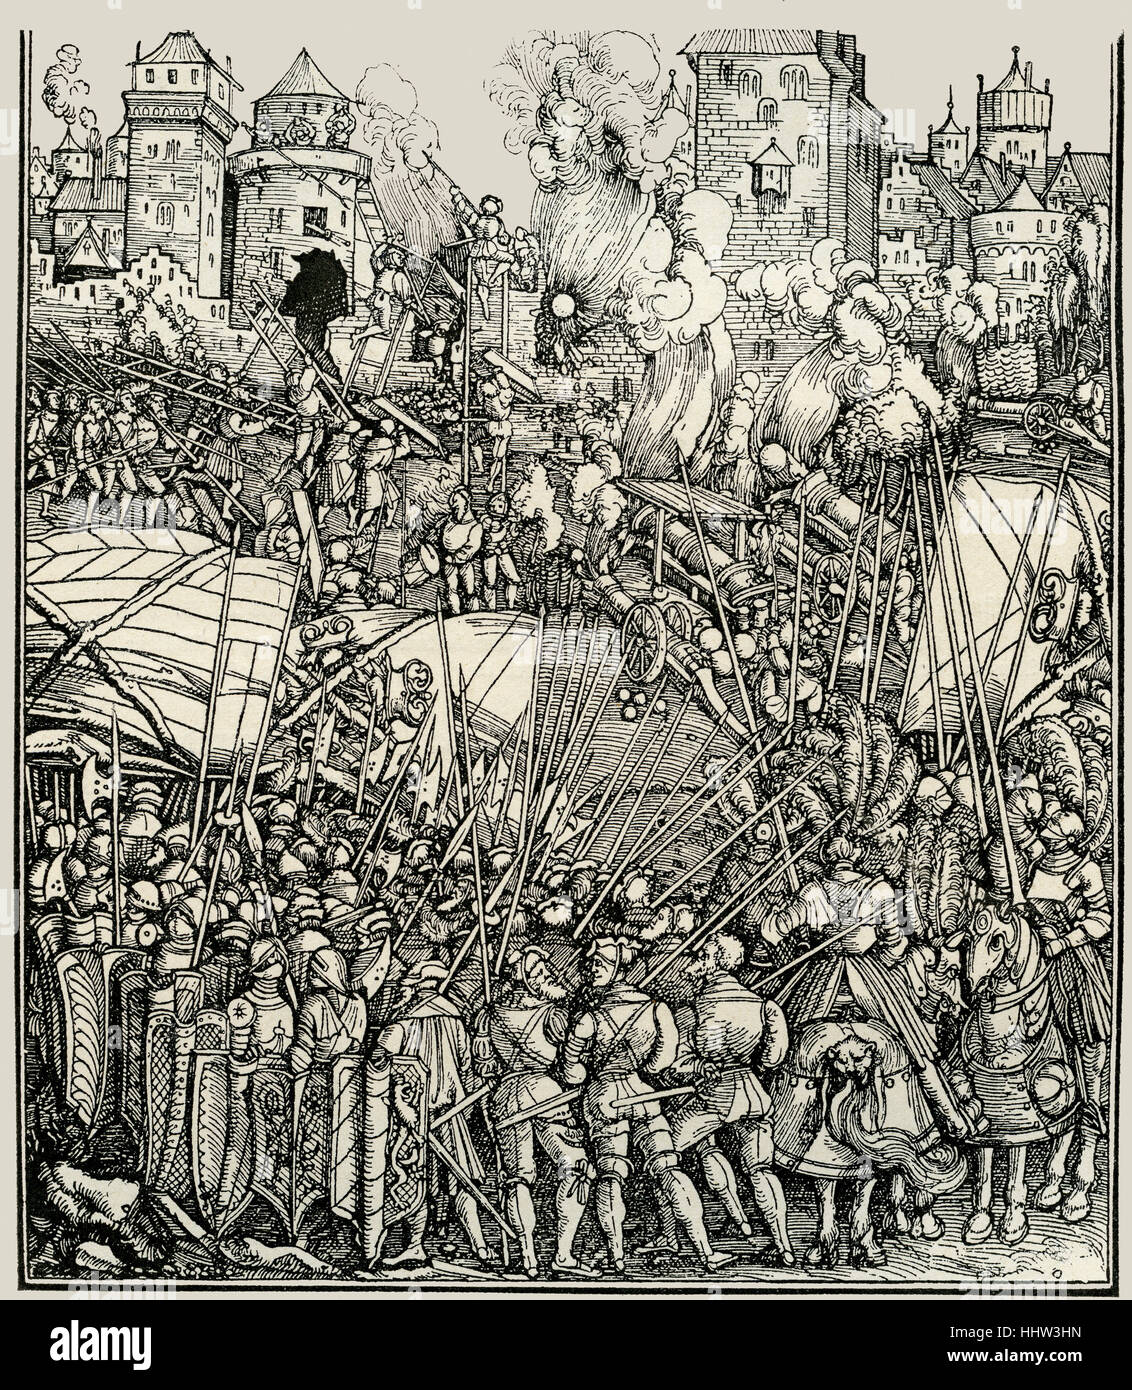 Siege of a city by the troops of Maximilian I, Holy Roman Emperor (22 March 1459 – 12 January 1519). Woodcut by Albrecht Durer Stock Photo